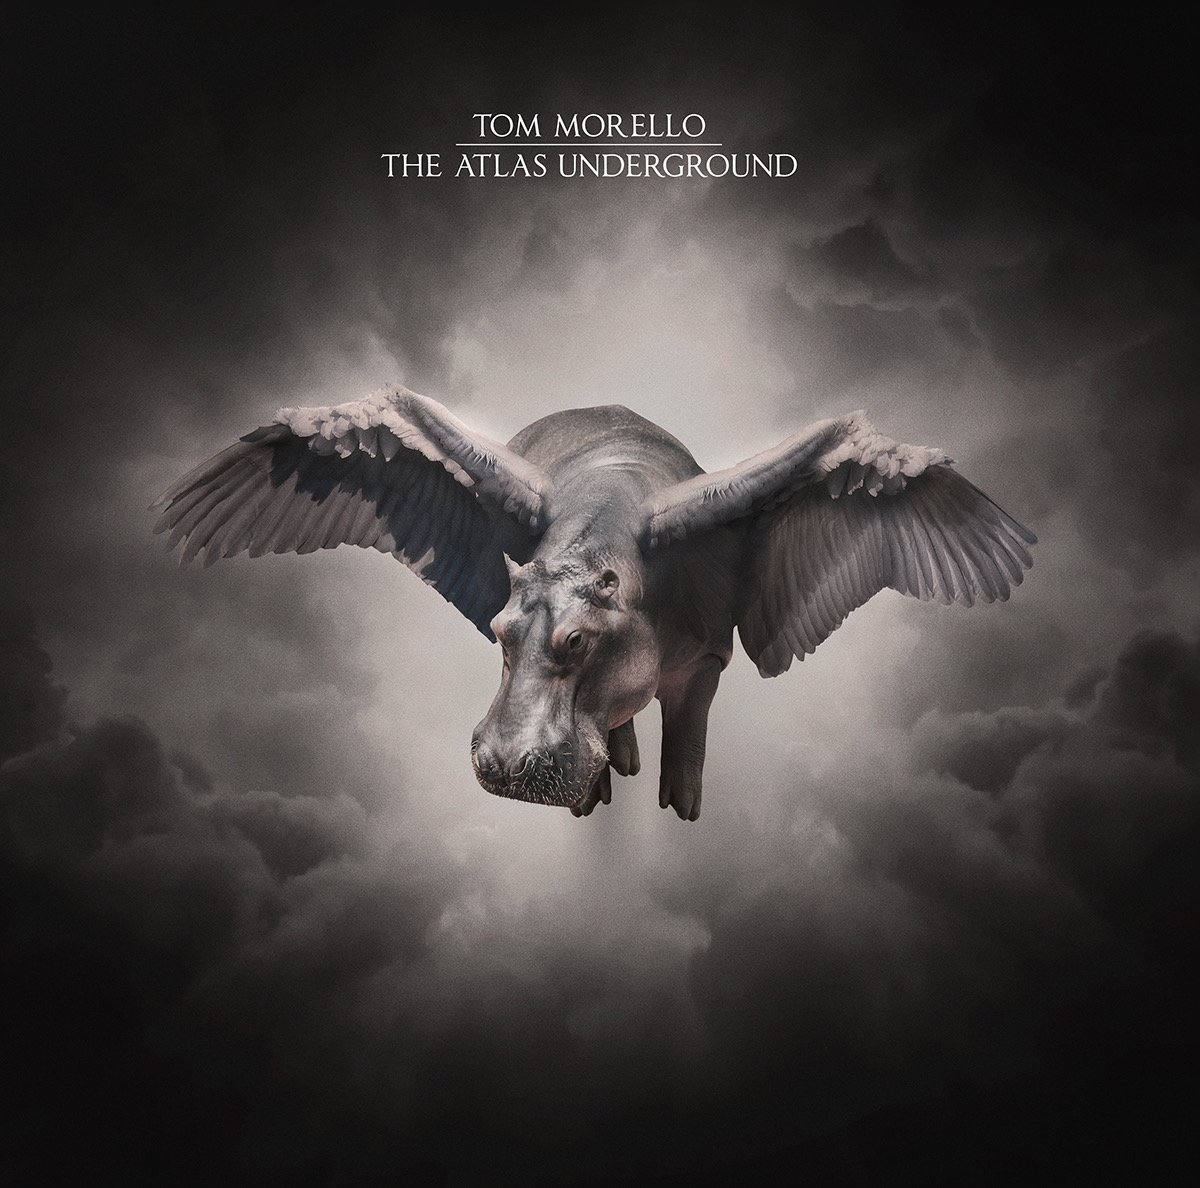 New LP from @tmorello on the way! Battle Sirens included 🔥 youtu.be/3B5IGjqGMSc https://t.co/uuoVrf0O3Q